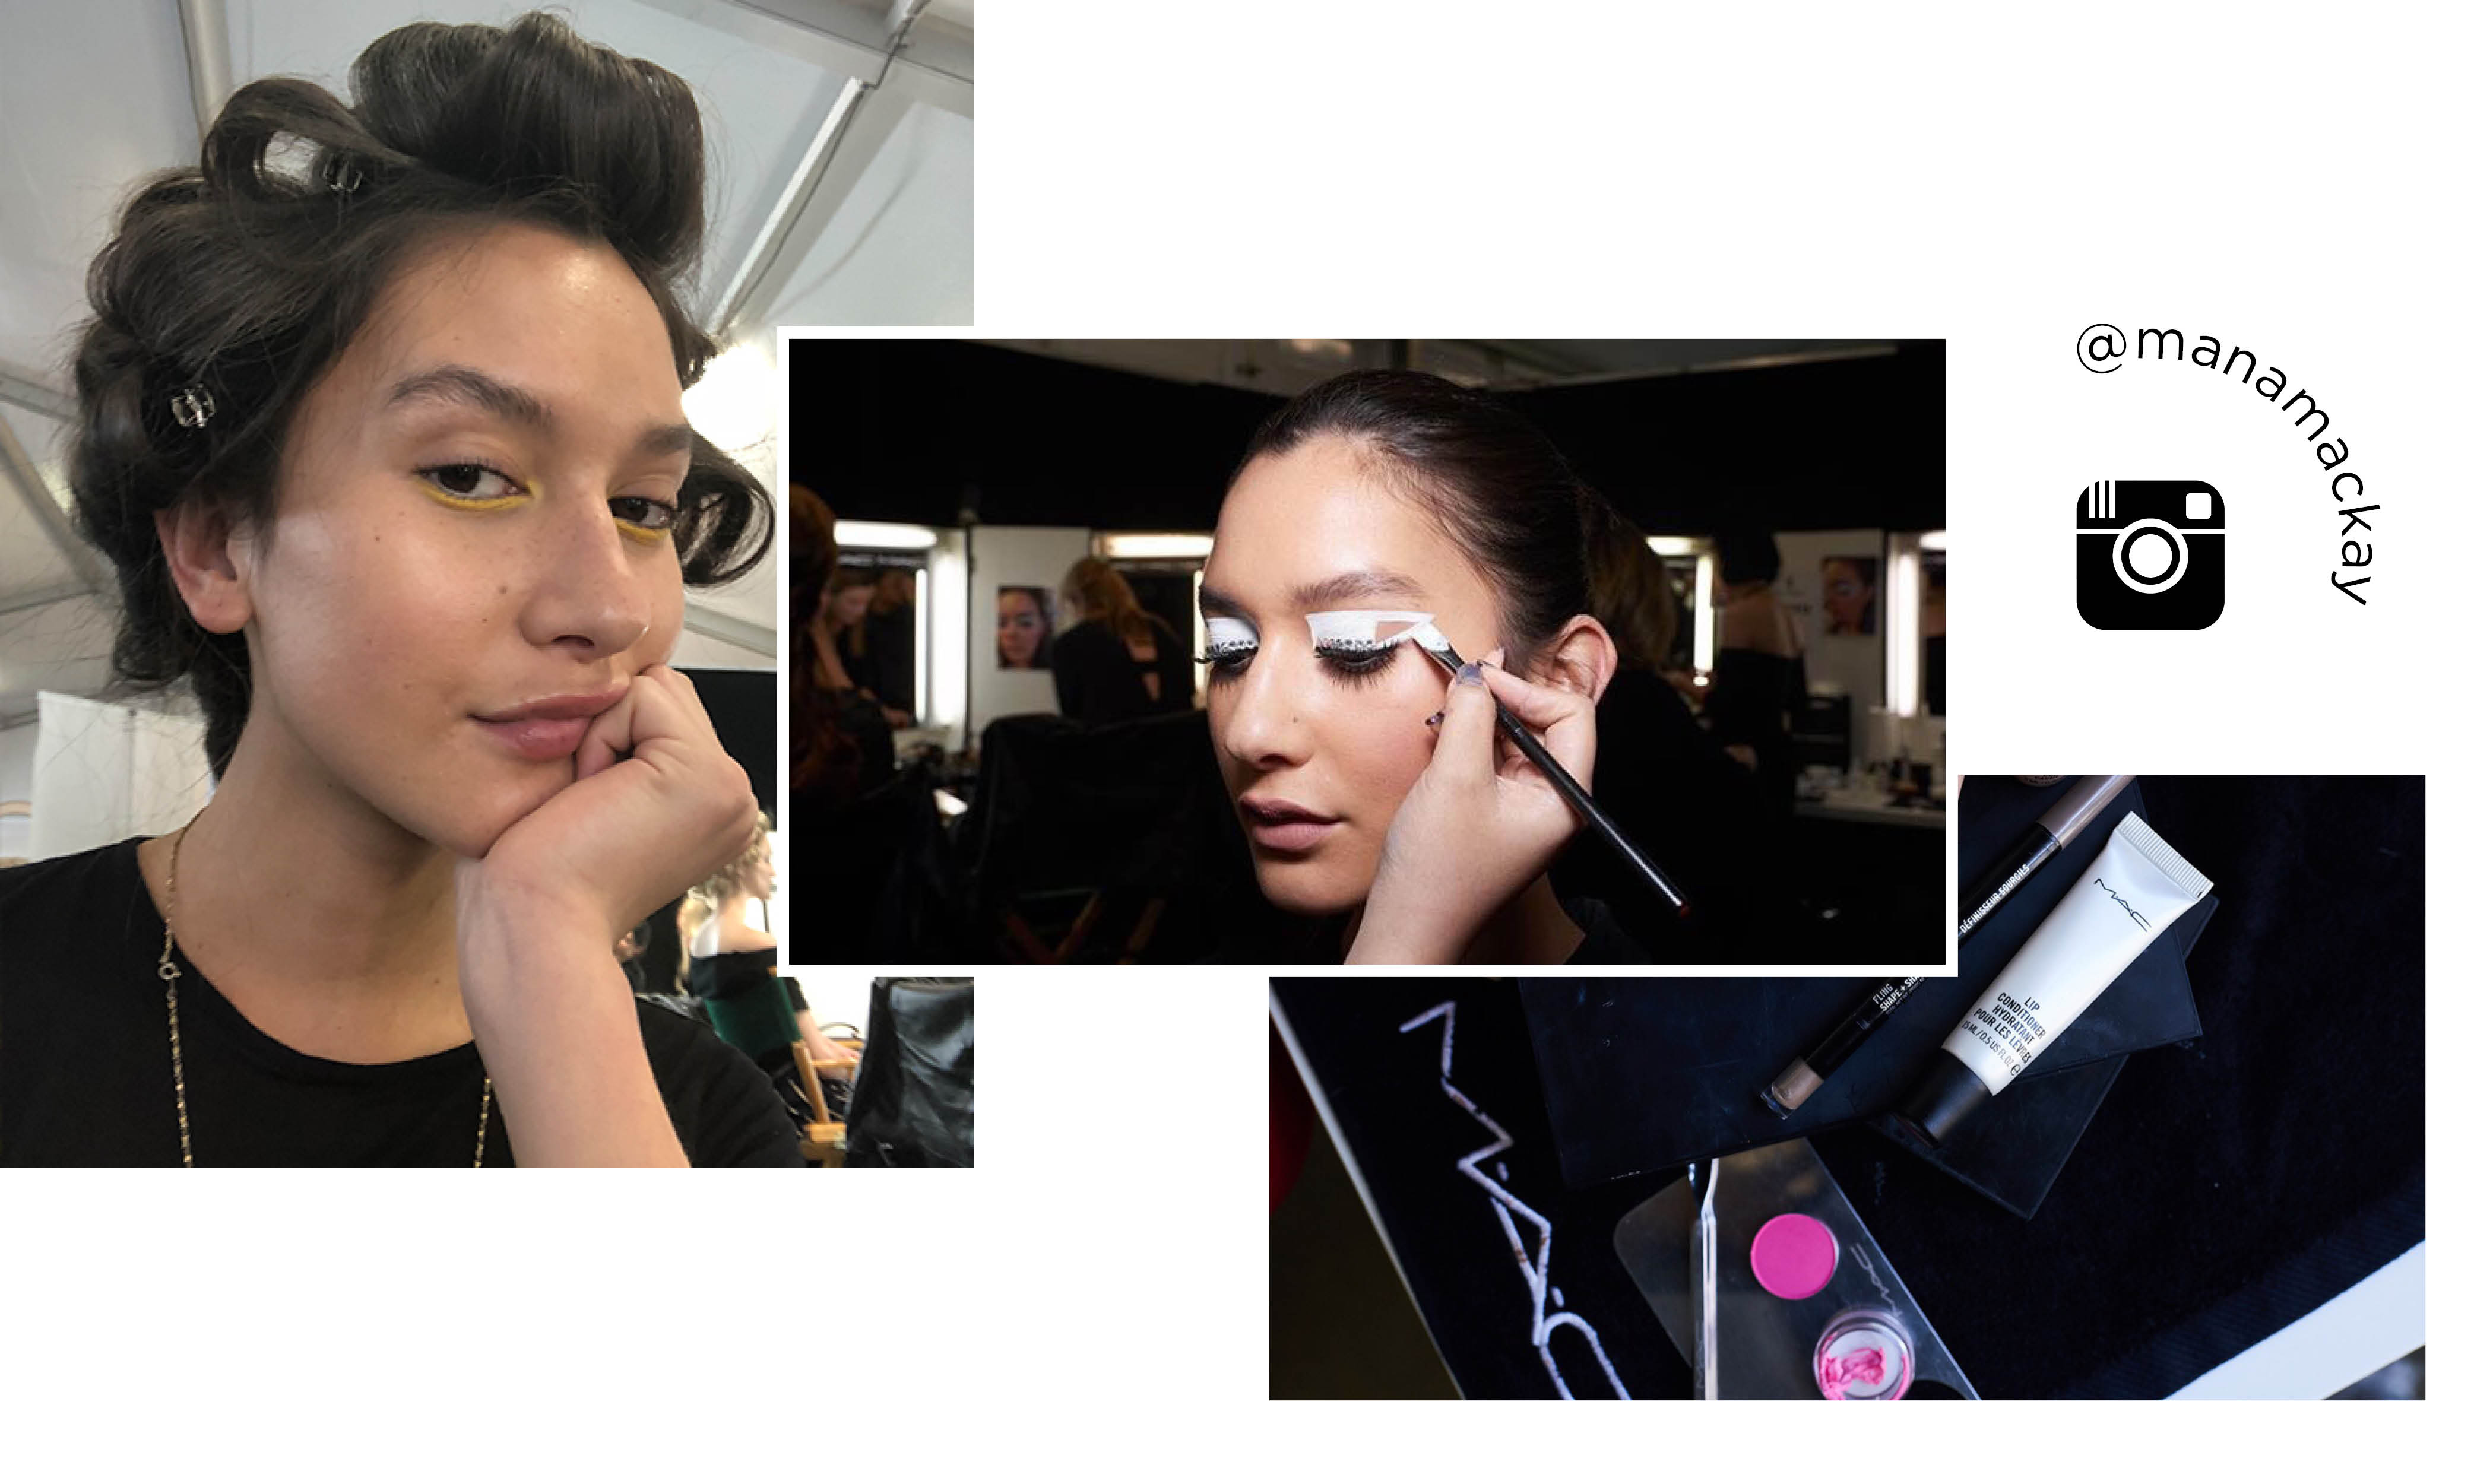 Manahou-mackay-Backstage-Beauty-Diary_1000x600_collage 2